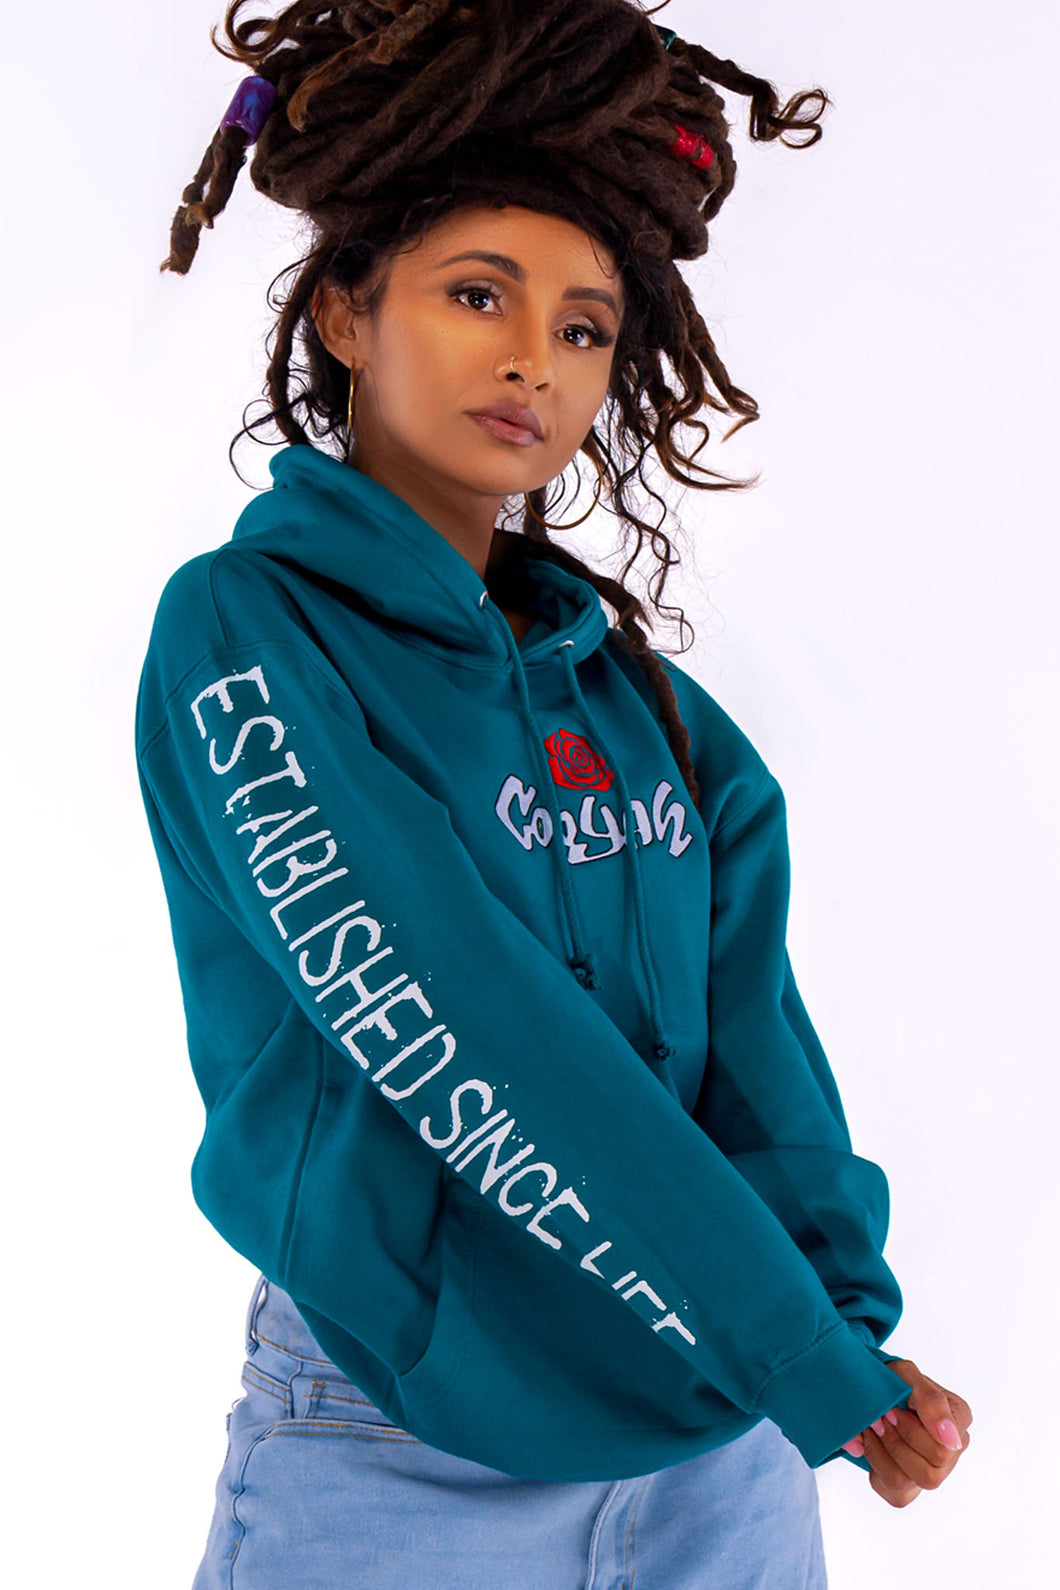 Cooyah Jamaica women's Embroidered Rose Hoodie in teal. Floral design, Jamaican streetwear clothing.